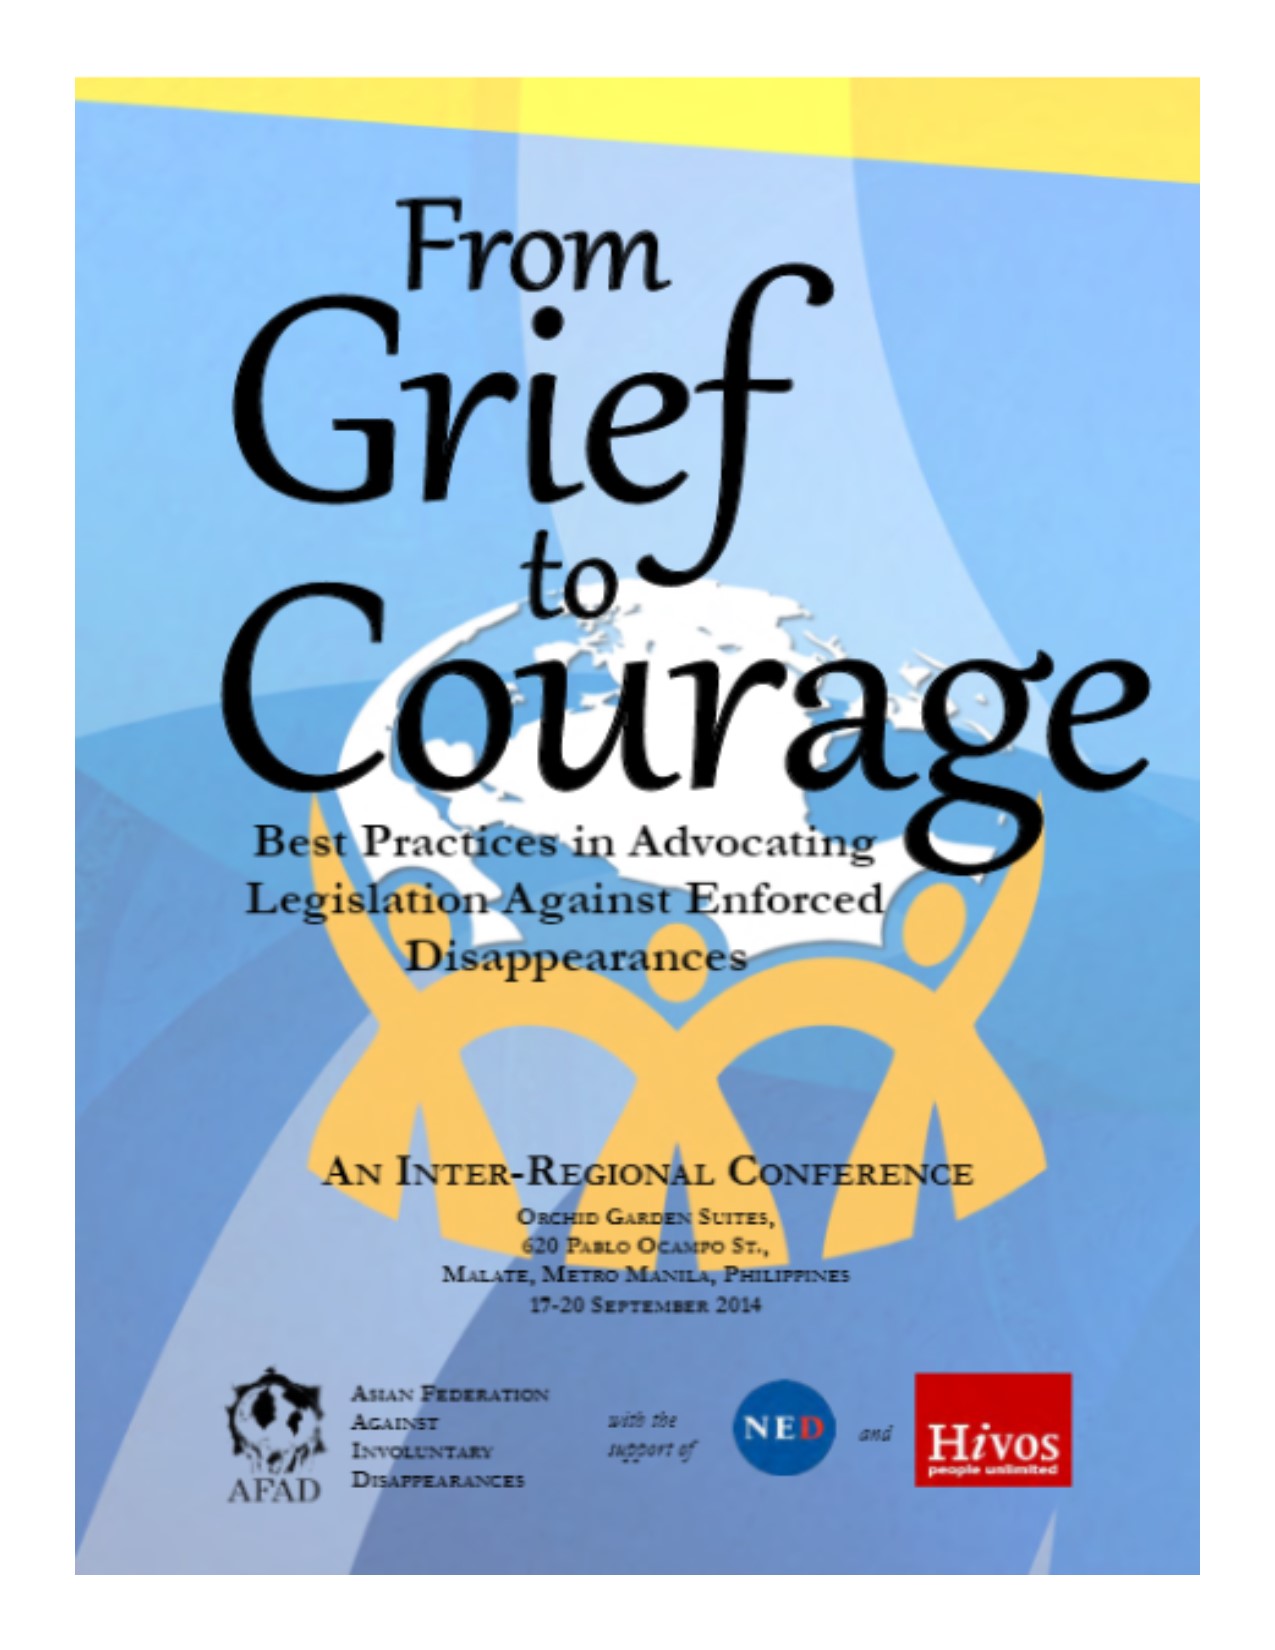 From grief to courage : best practices in advocation legislation against enforced disappearance an inter-regional conference